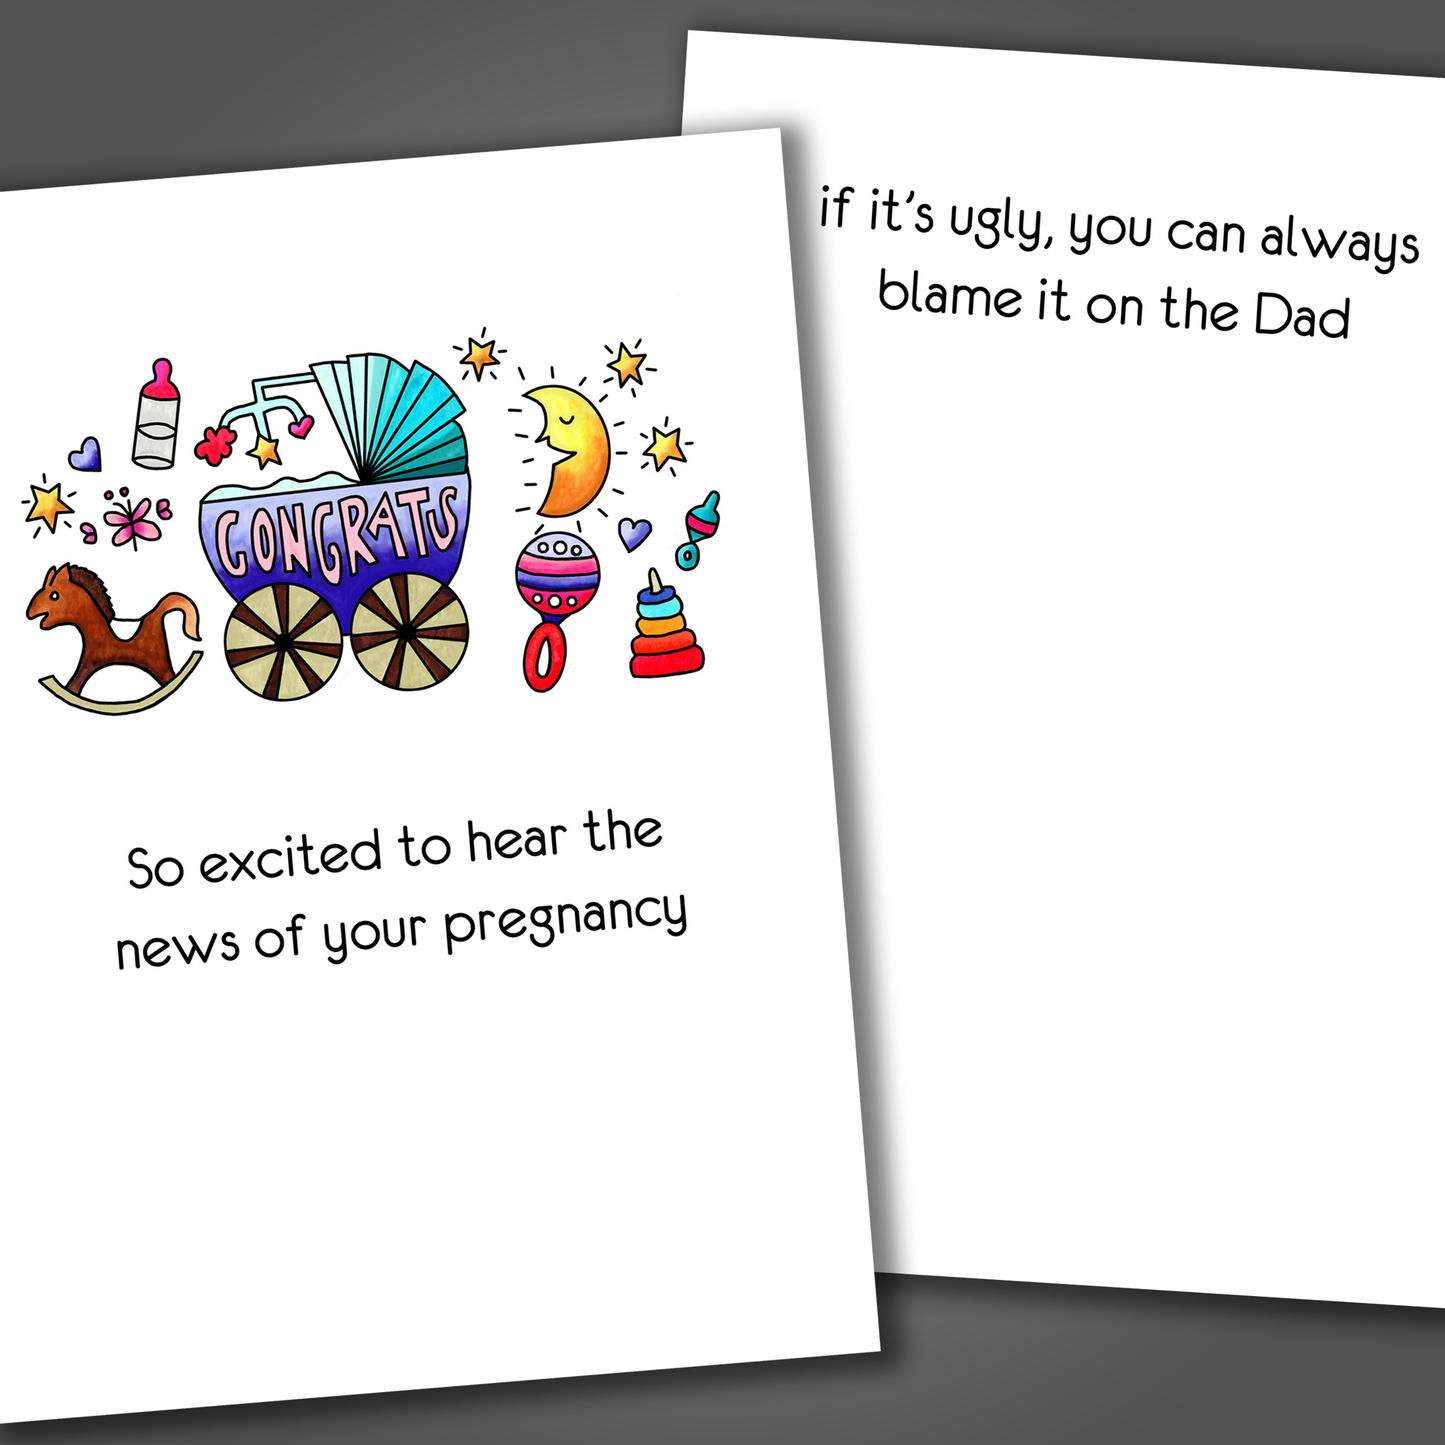 Funny new baby or adoption card with a baby stroller and toys on front of card and funny joke inside of card that says if your if your baby is ugly you can blame it on dad!